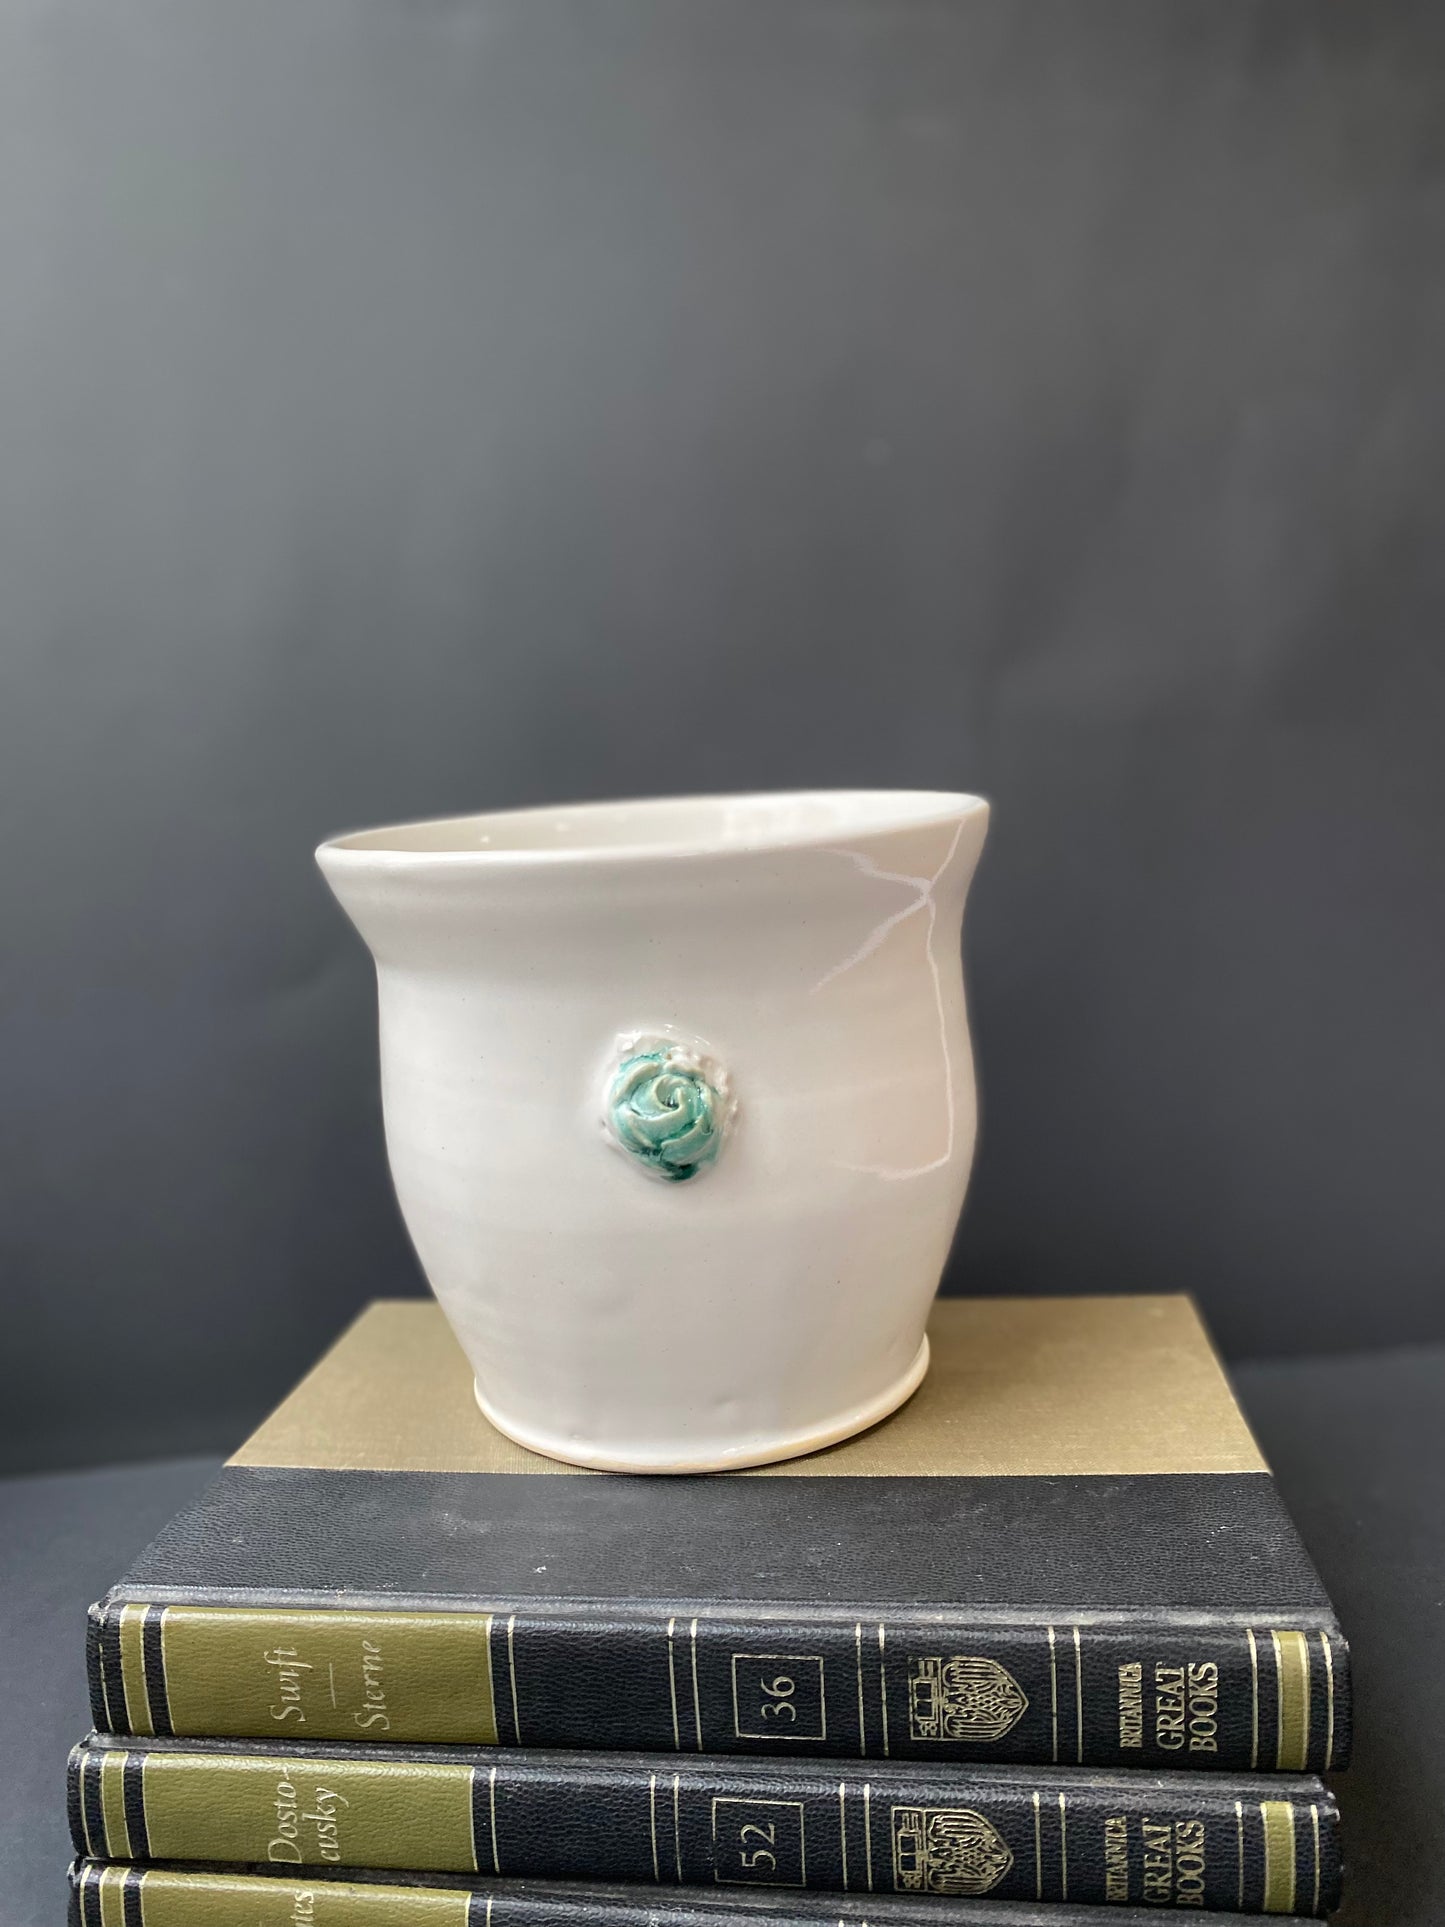 Wide mouth vase with decorative rose flower “handle” detail